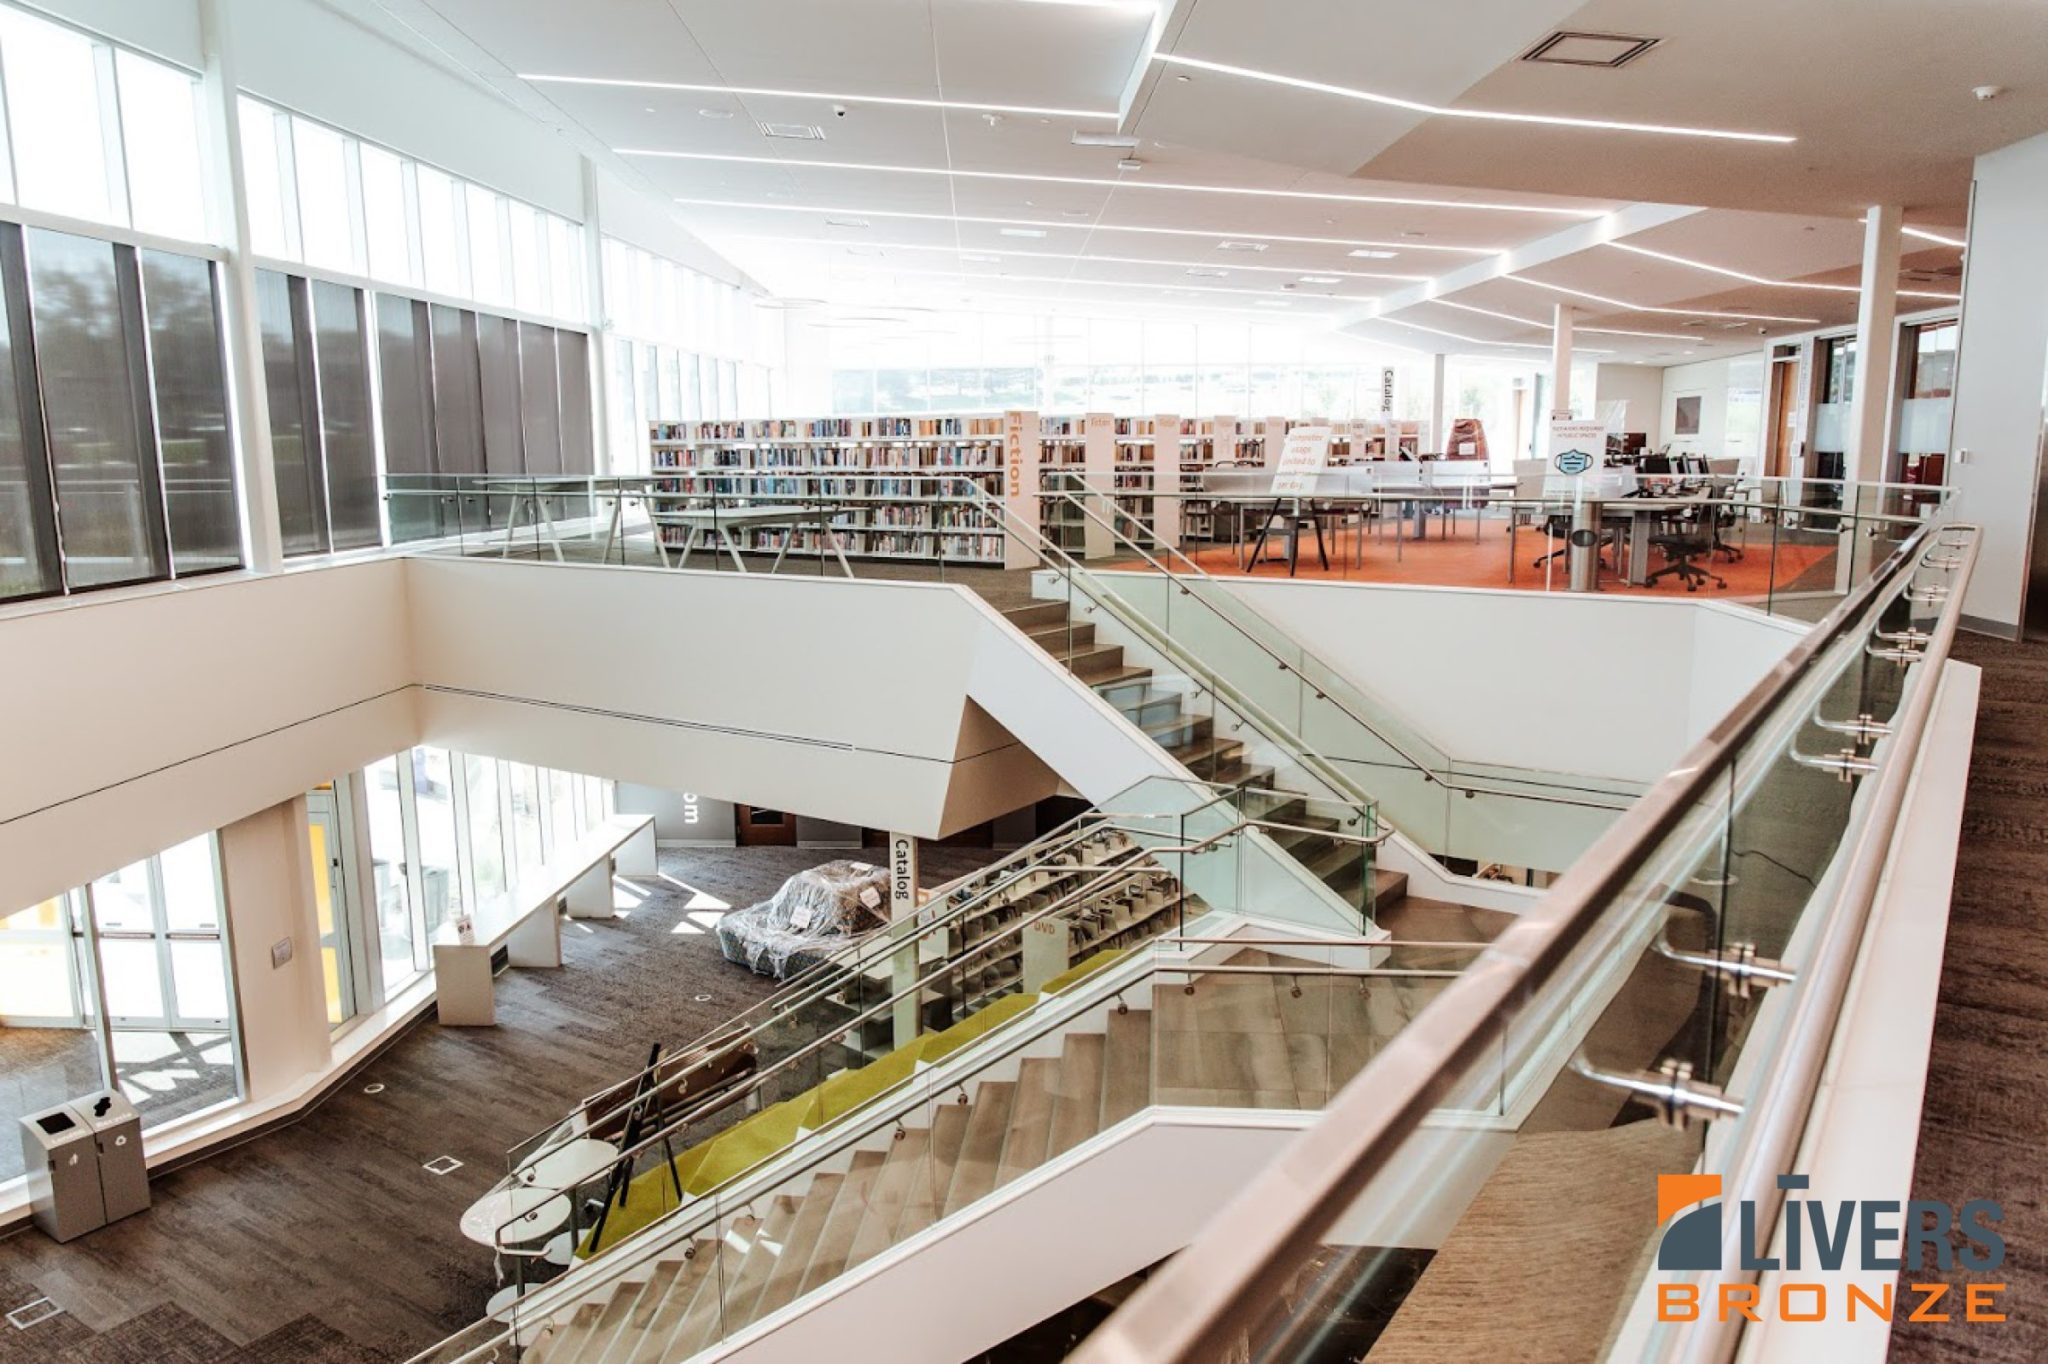 Livers Bronze Struct-U-Rail Commercial Glass Railing system installed at the lobby stair and interior balcony at the Monticello Public Library, Shawnee, Kansas, and is Made in the USA.